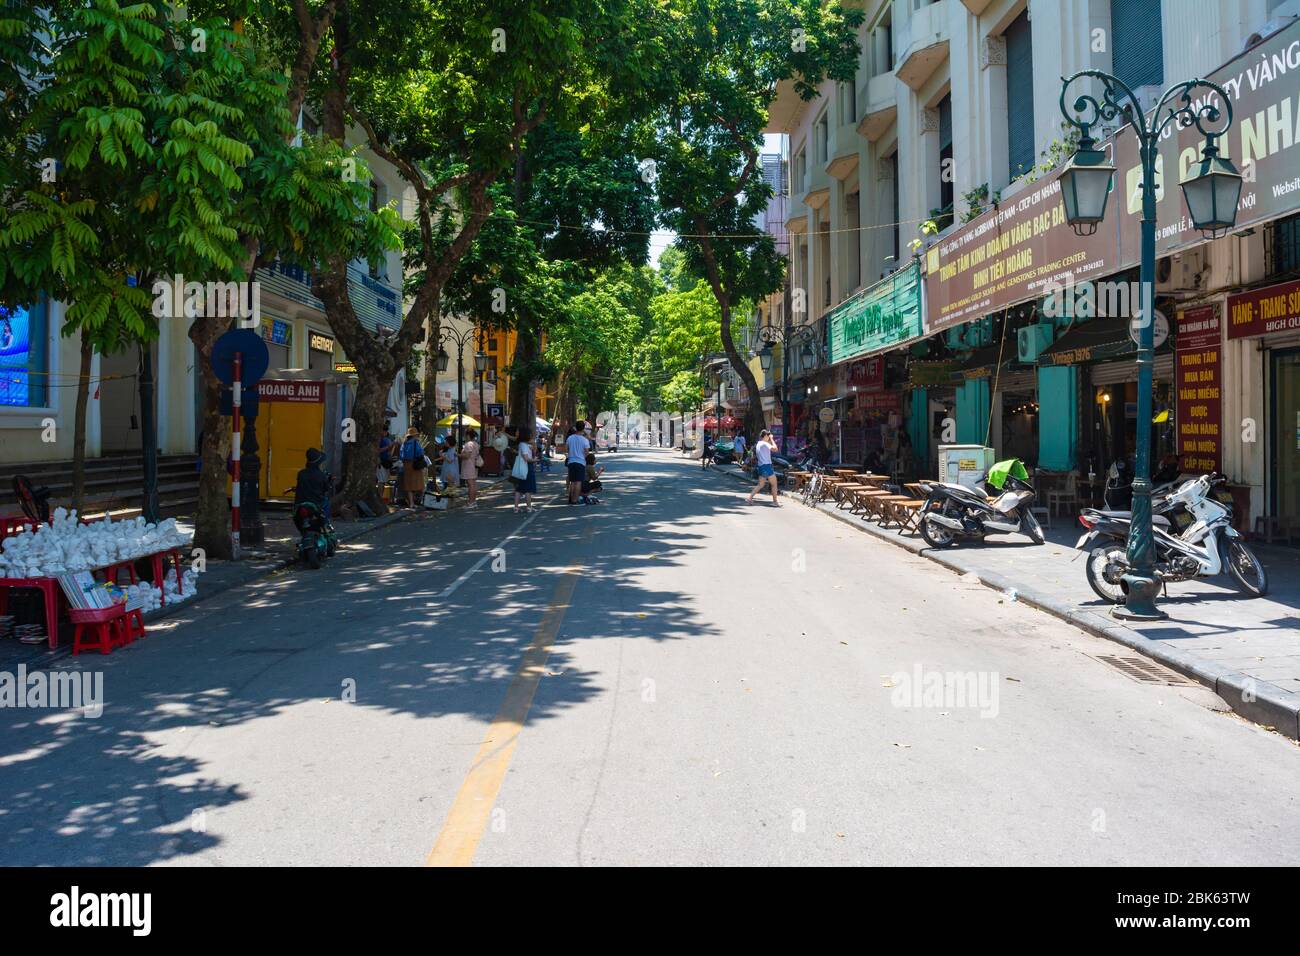 Deserted/empty streets in Hanoi, due to fear of corona virus pandemic. WHO suggests social distancing or staying at home to reduce the contagion rate. Stock Photo